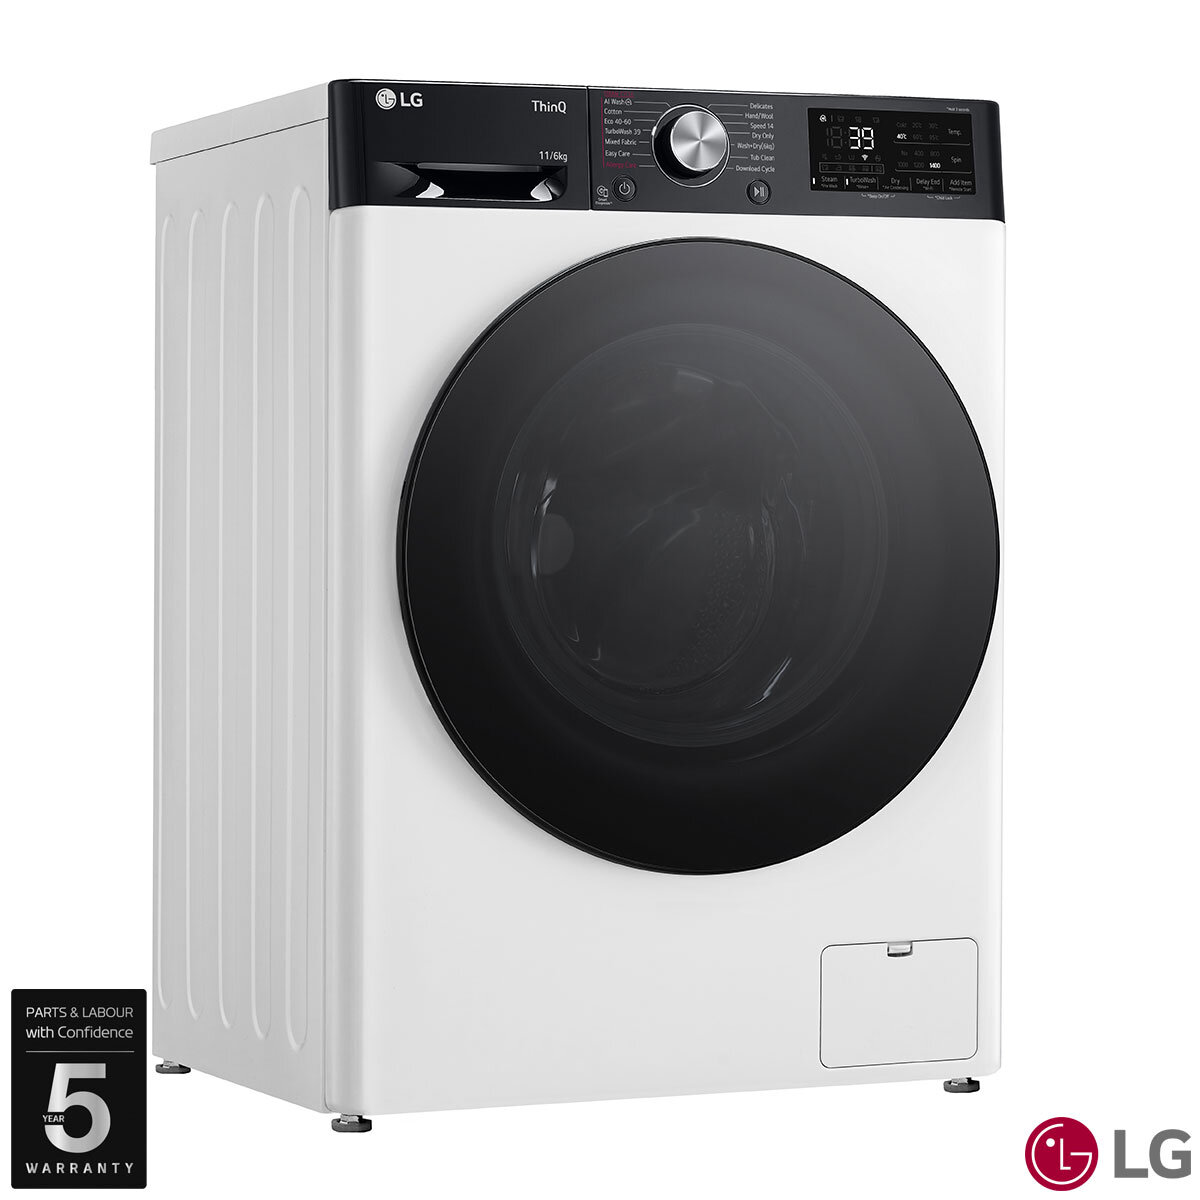 LG FWY916WBTN1 Wifi enabled 11/6kg washer dryer, D Rated in White